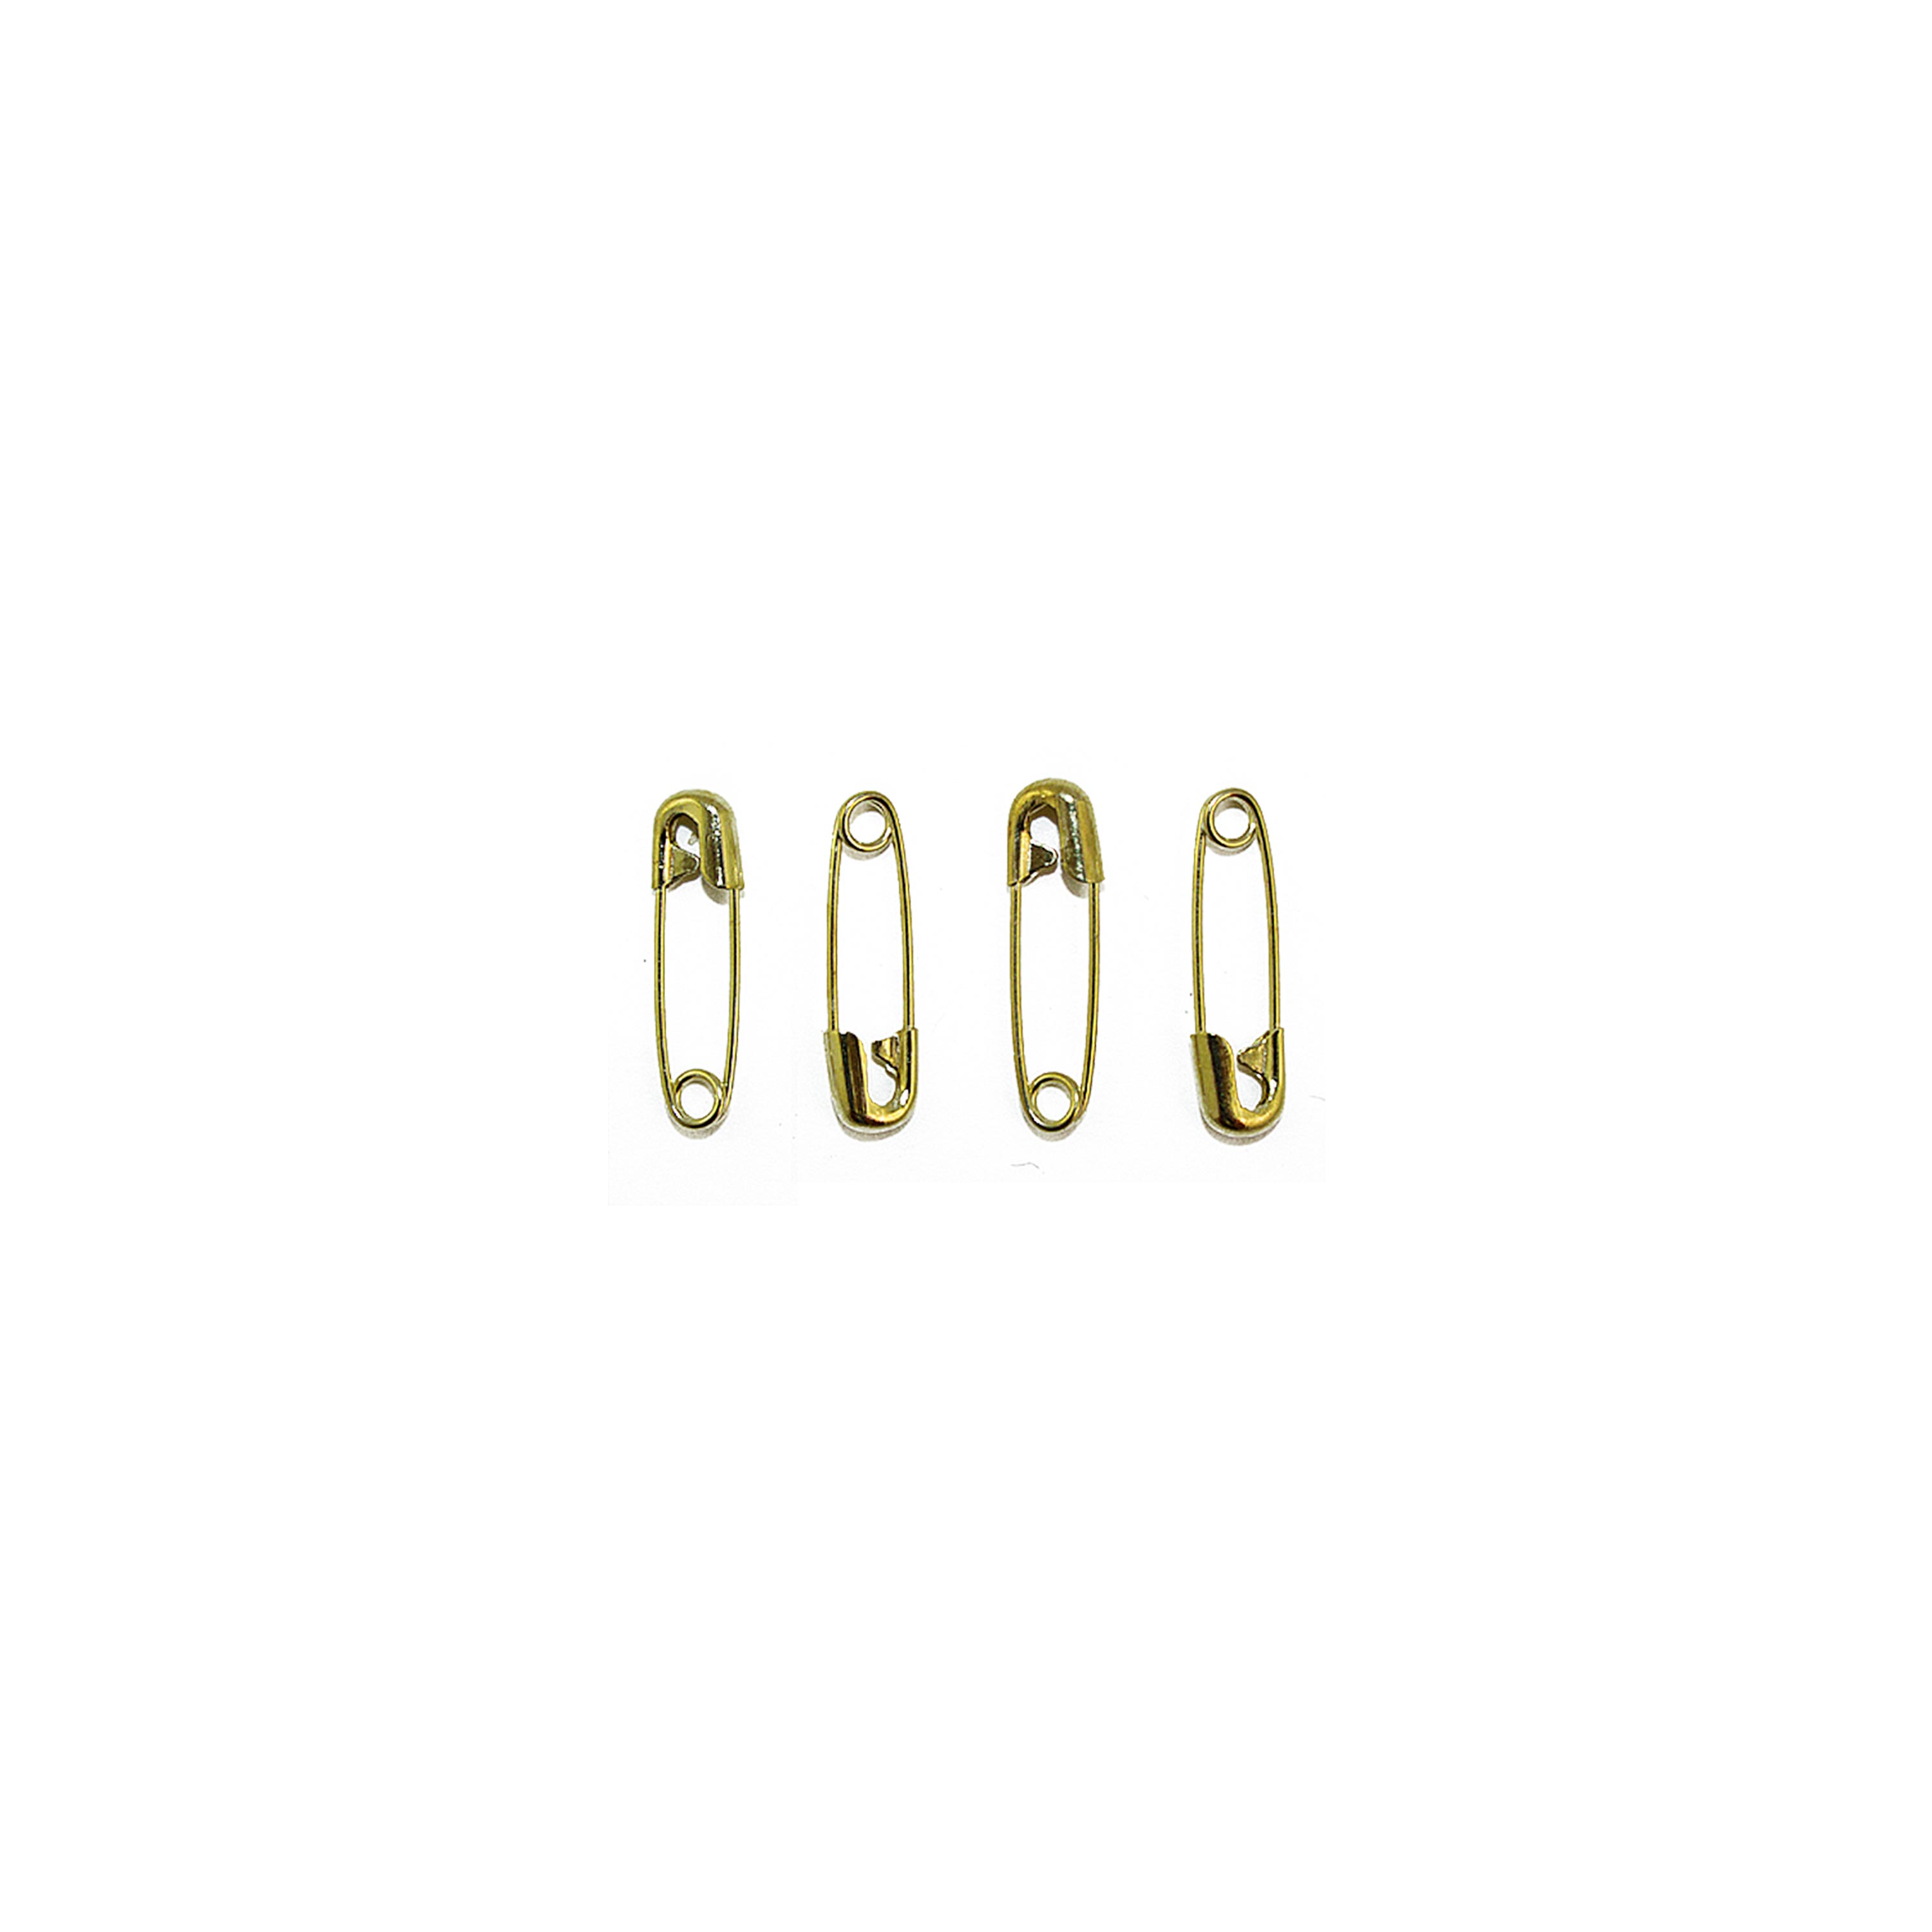 Gold Small Safety Pins Size 1 - 1 Inch 